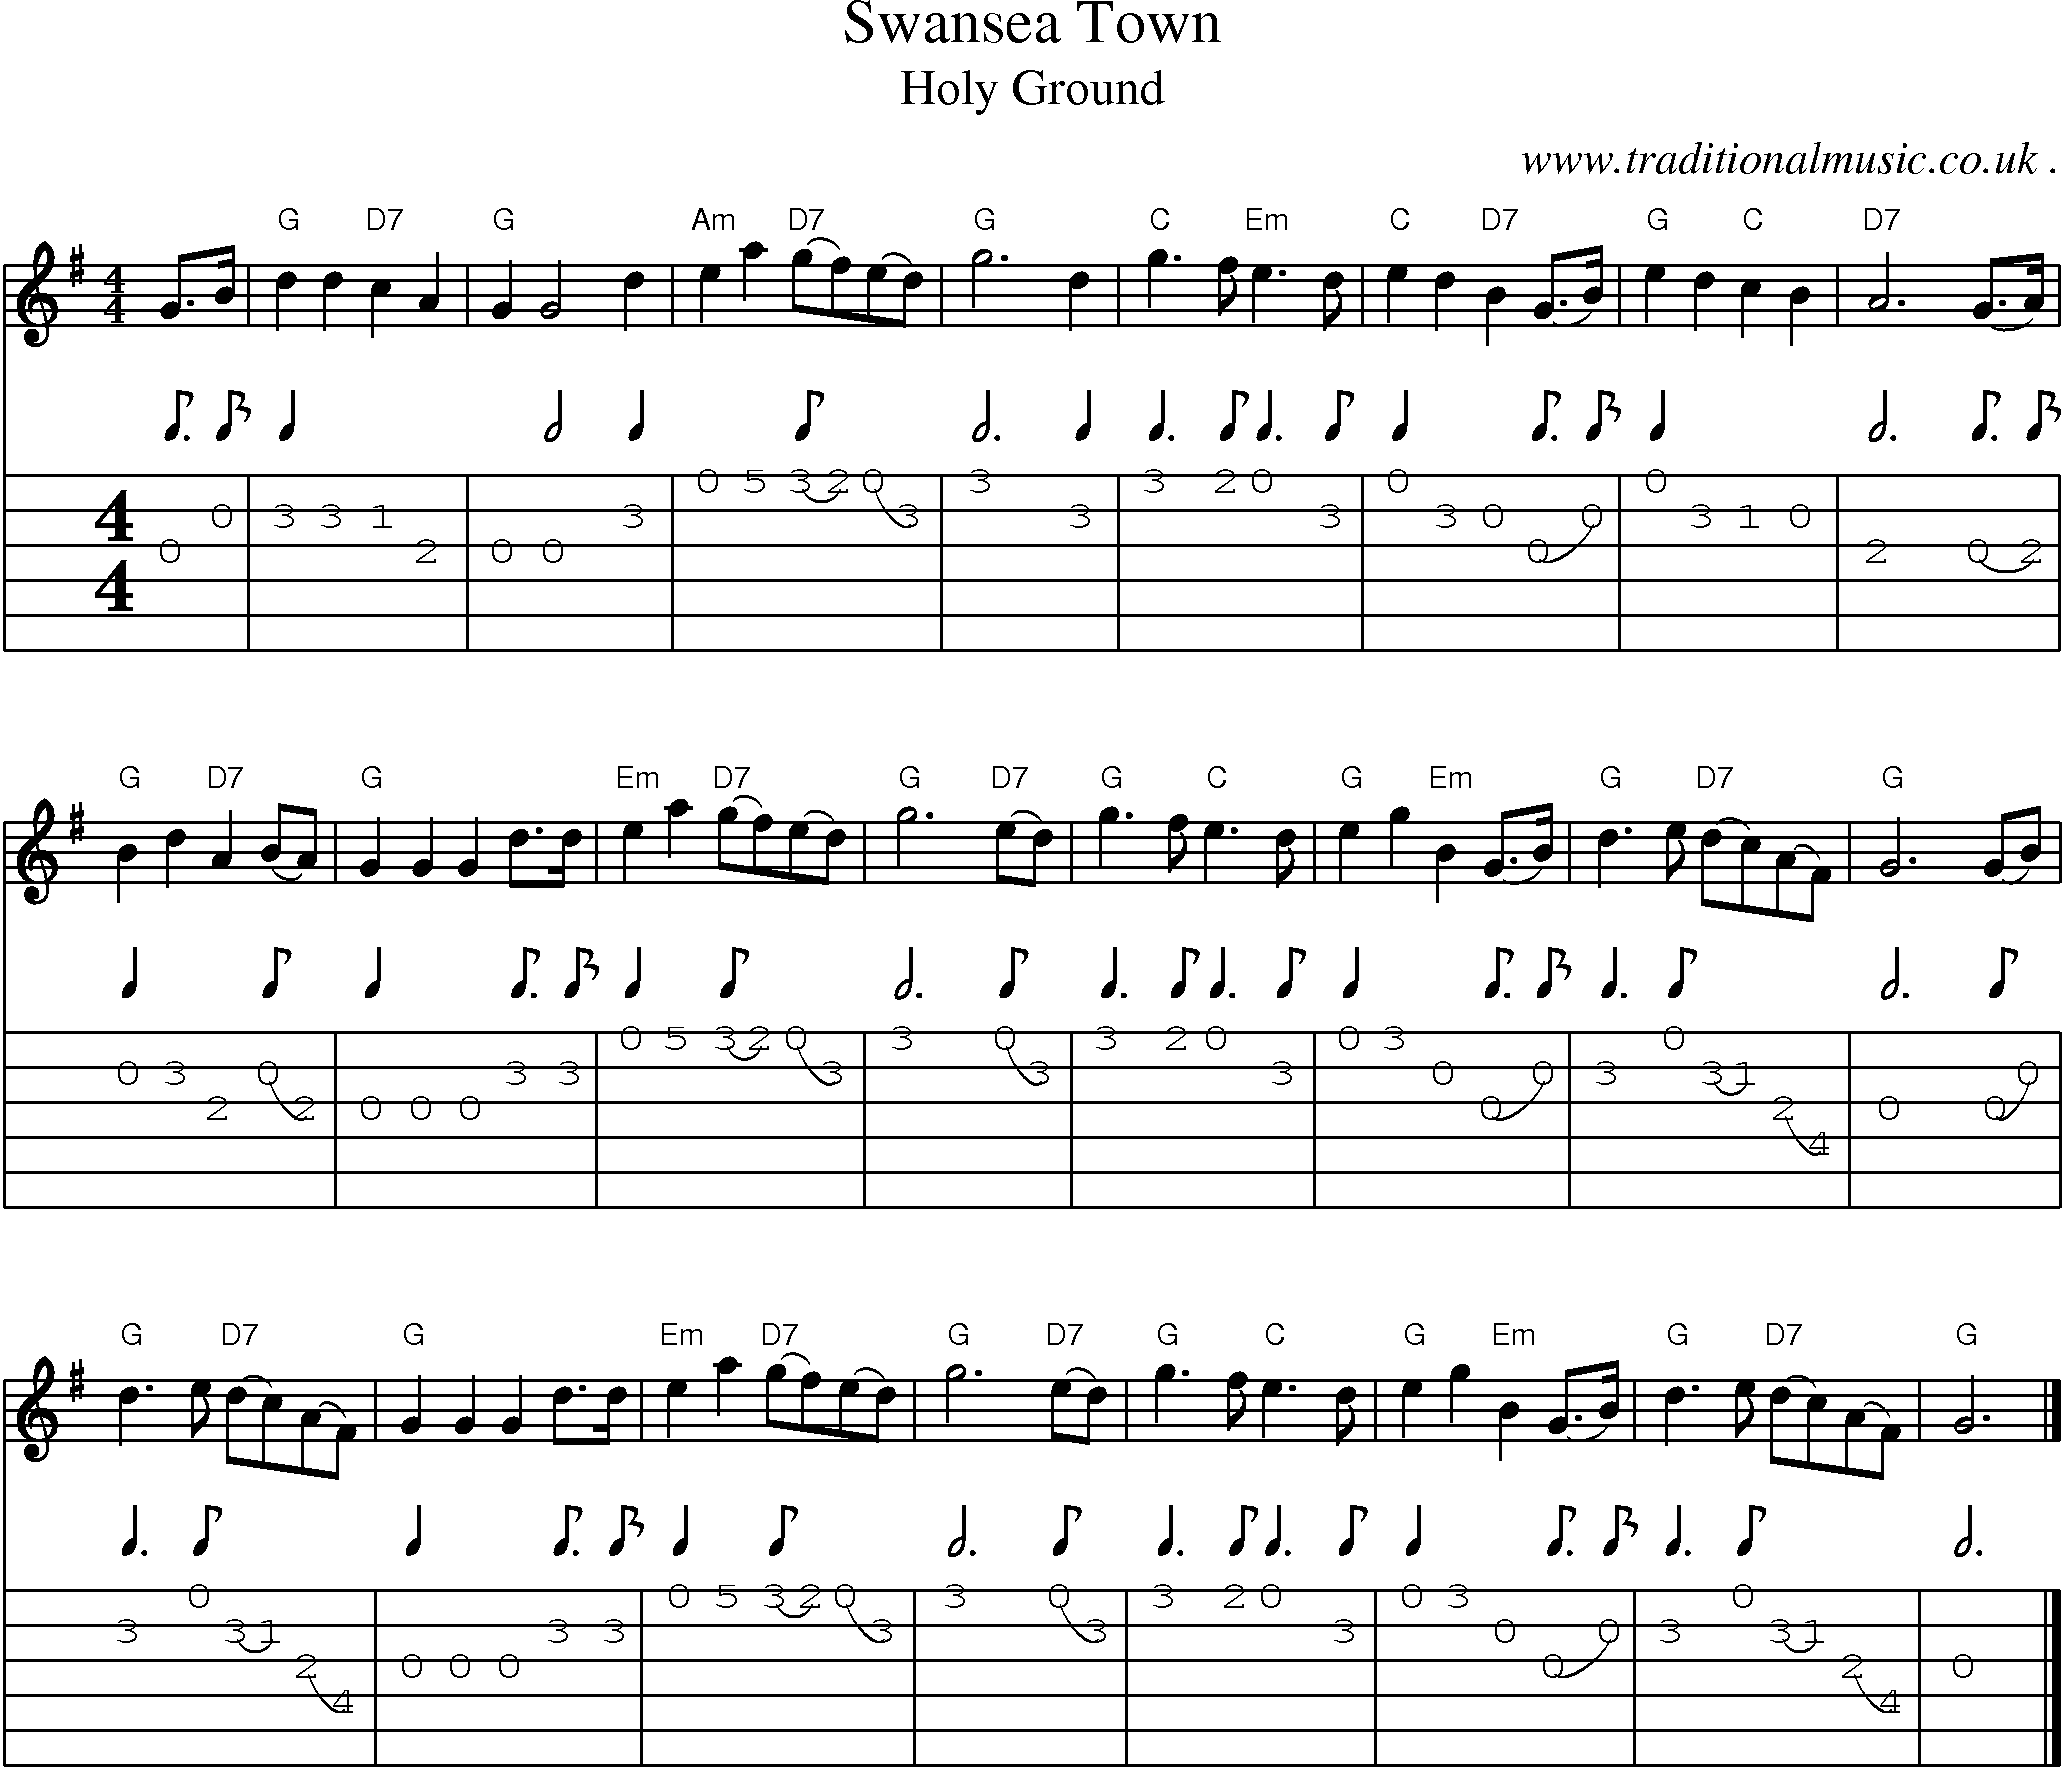 Music Score and Guitar Tabs for Swansea Town